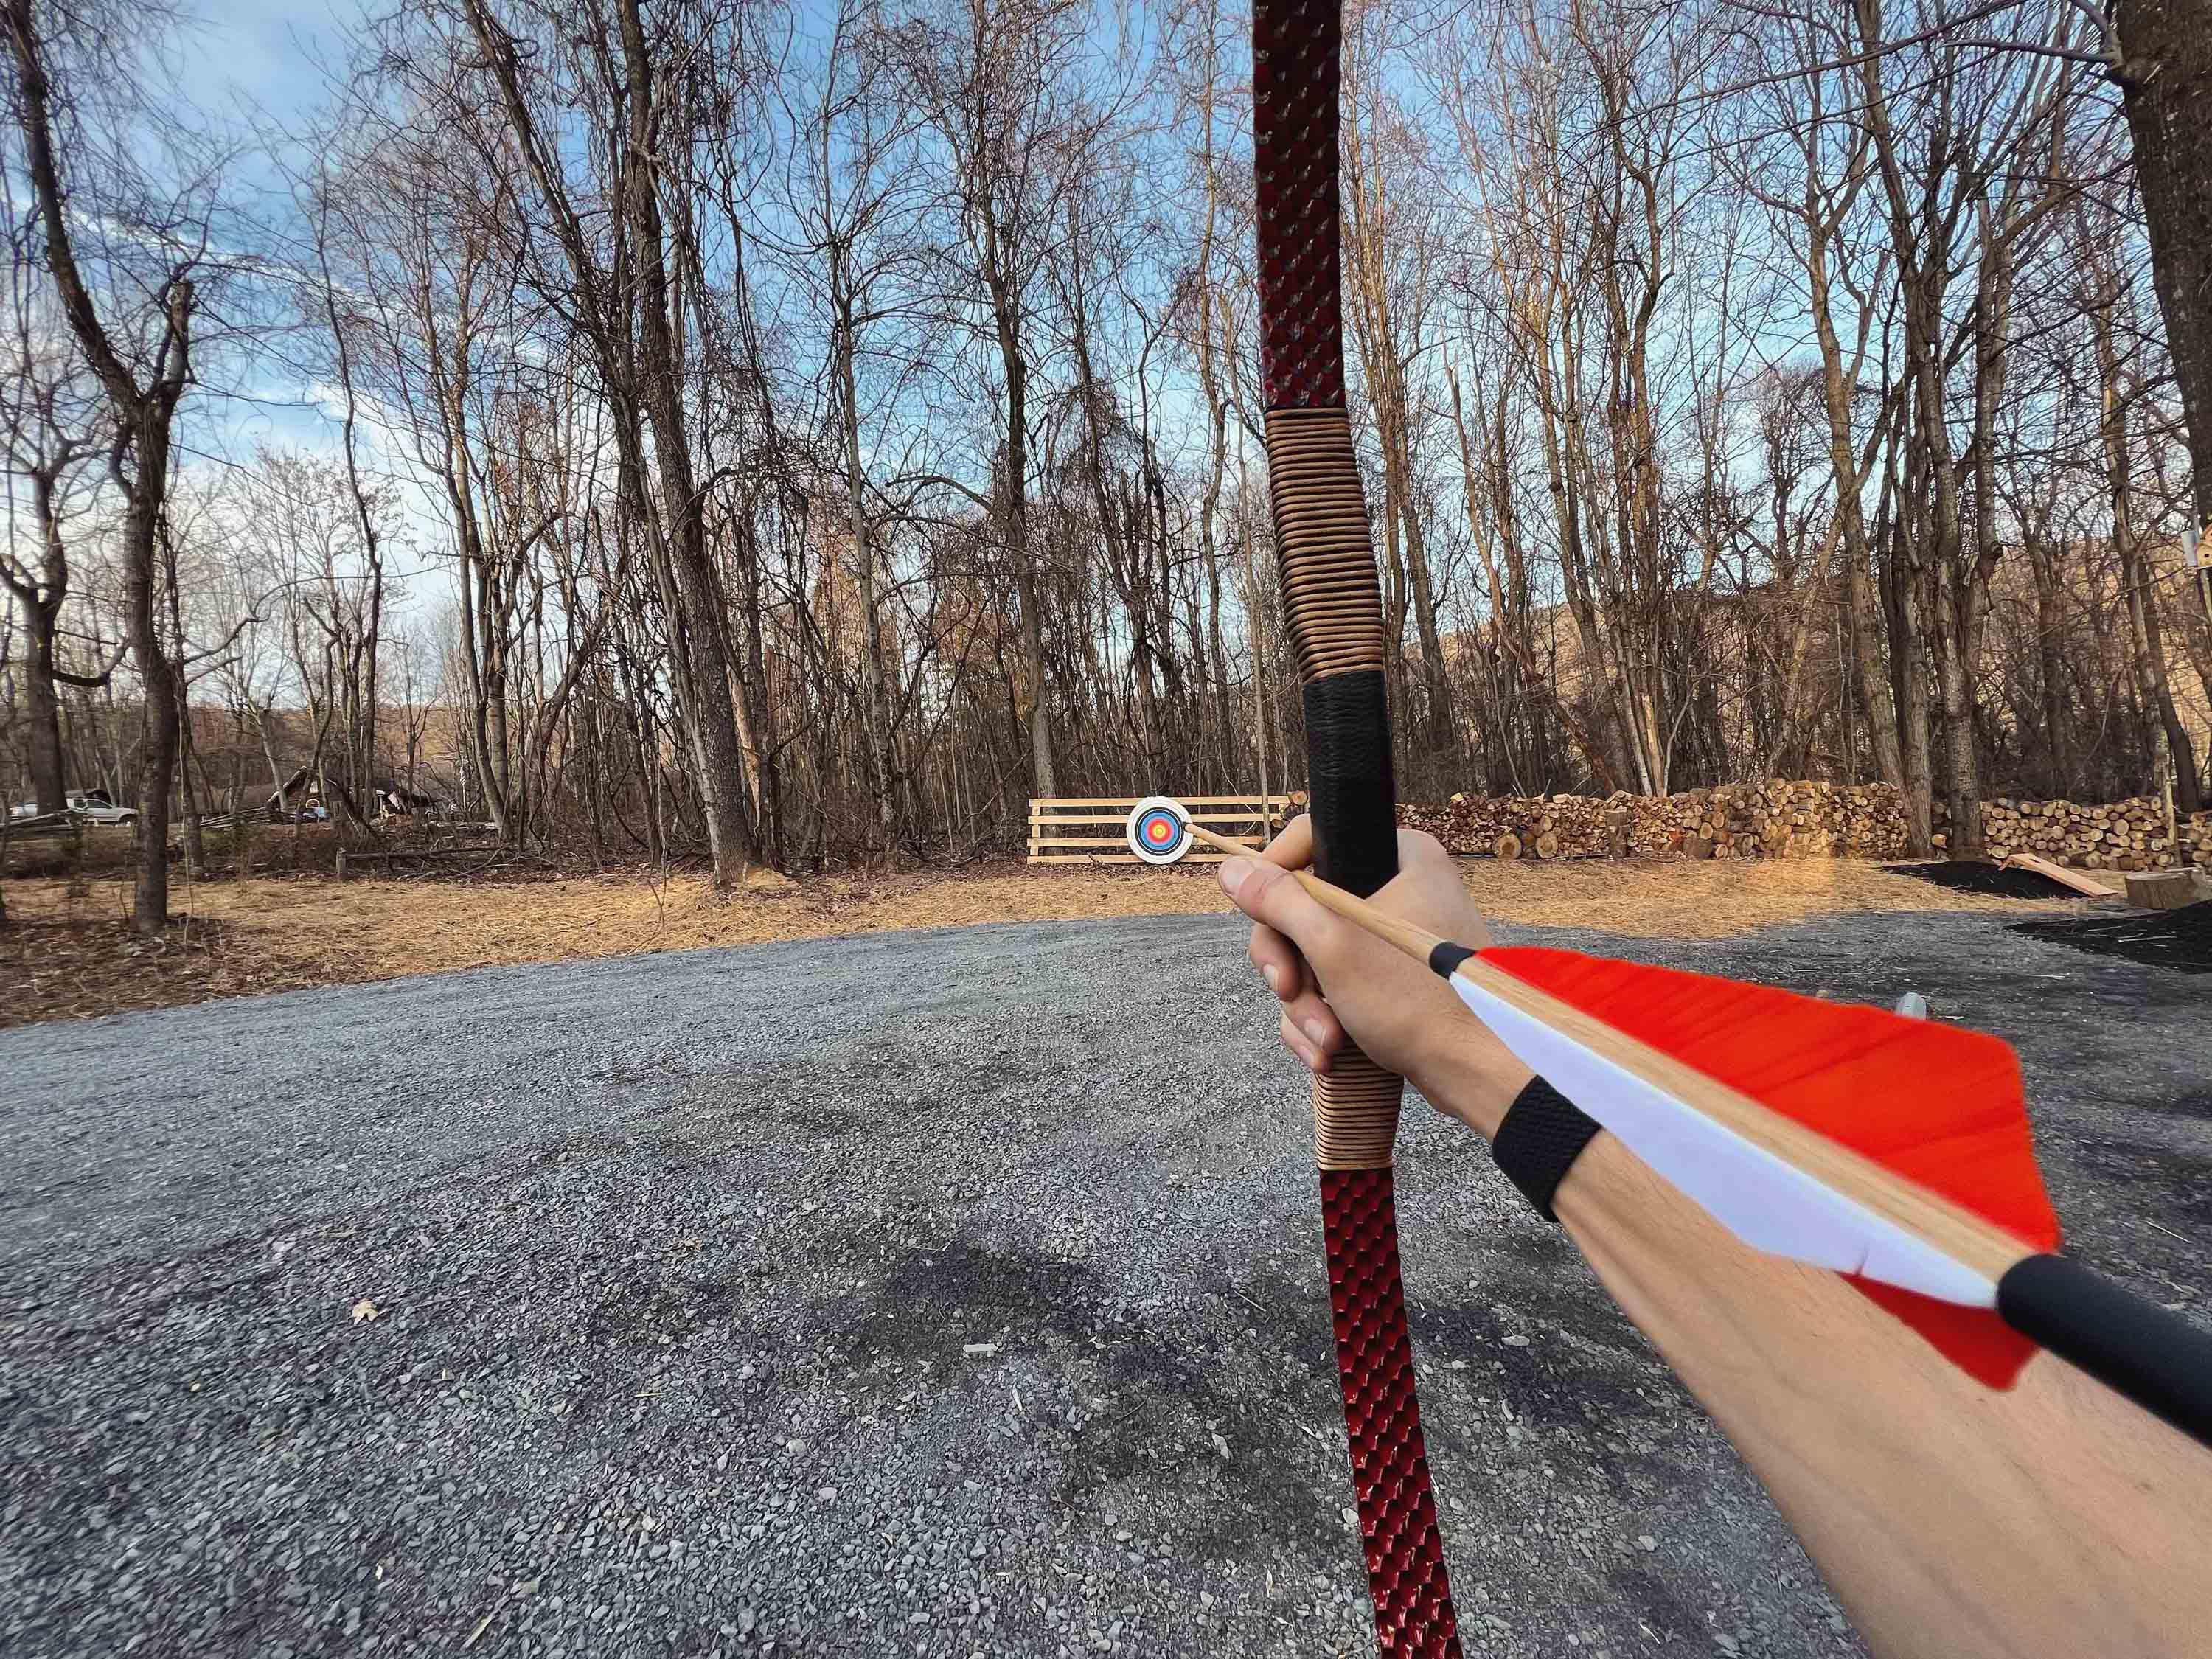 <span  class="uc_style_uc_tiles_grid_image_elementor_uc_items_attribute_title" style="color:#ffffff;">Archery with Kainokai traditional handmade recurve longbow (40 pounds)</span>